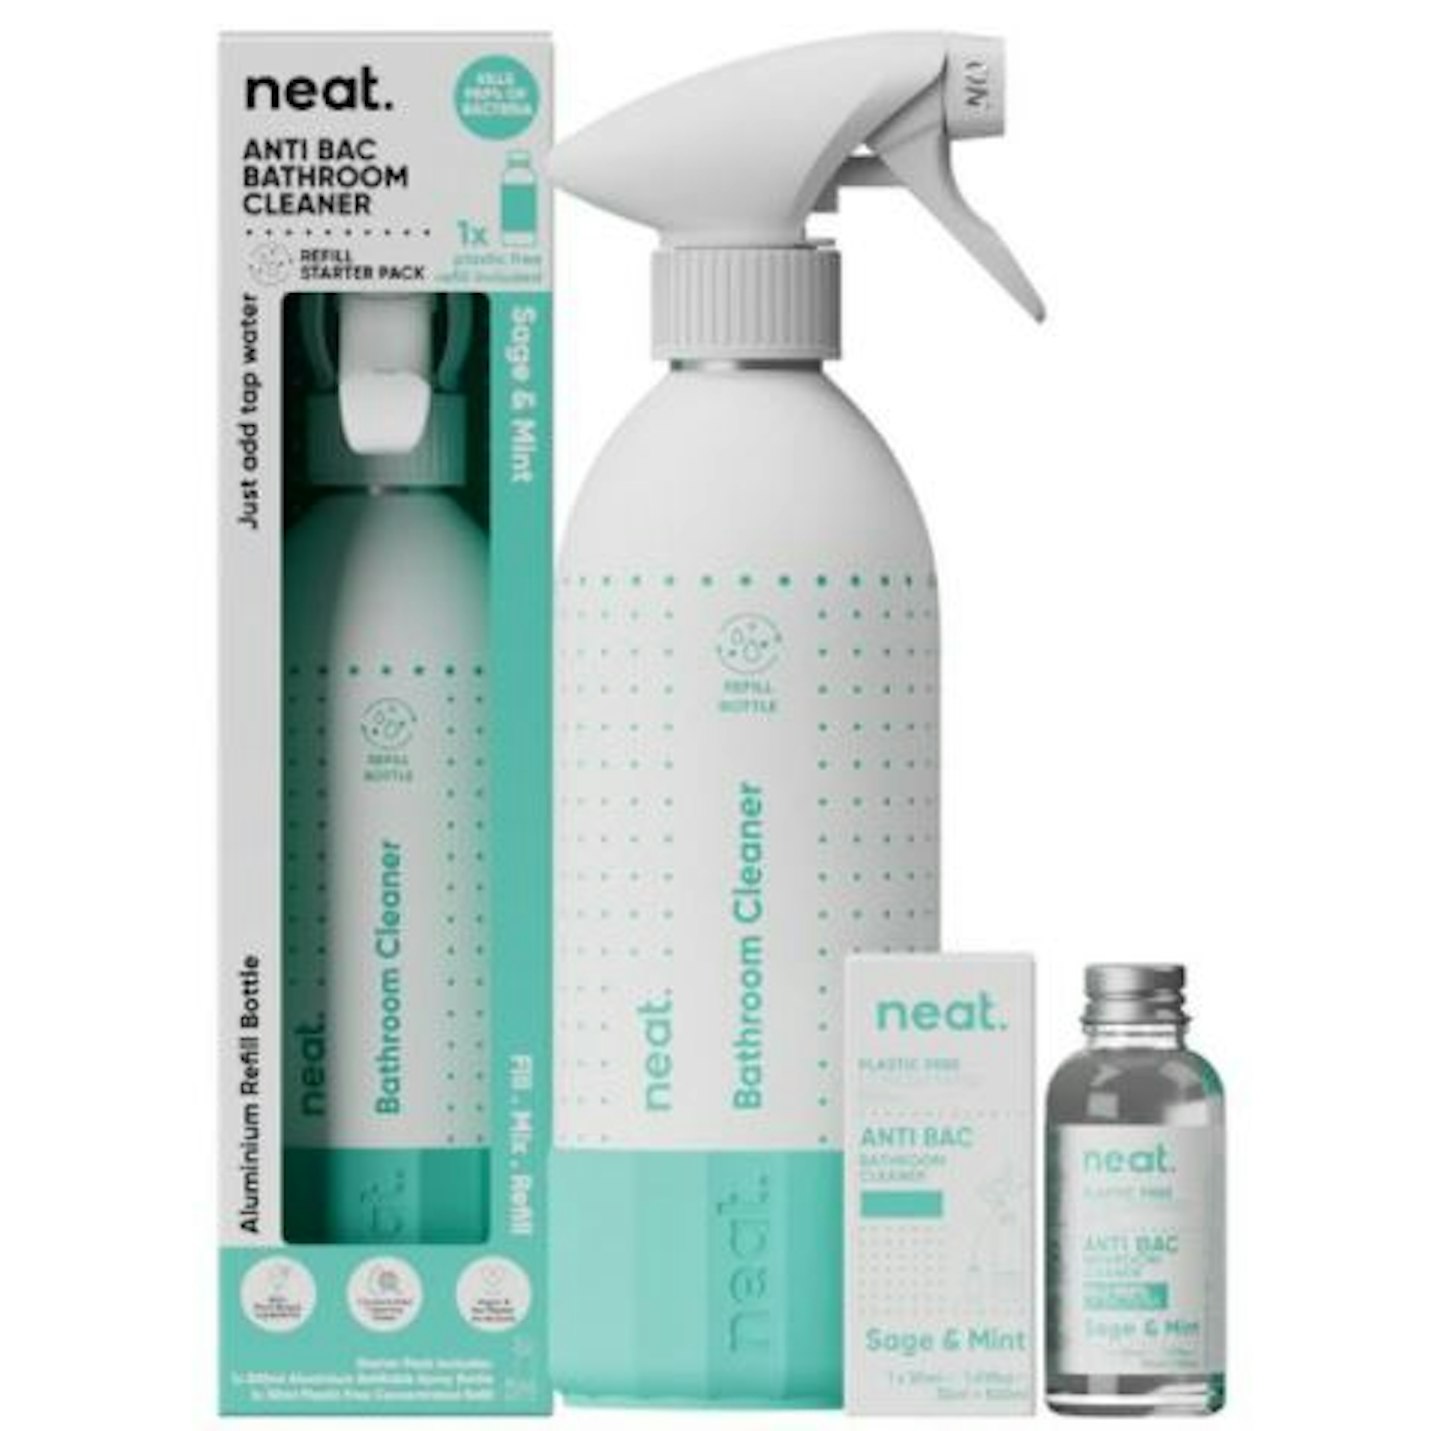 Neat Anti-Bac Bathroom Cleaner Refill Starter Pack Sage & Mint